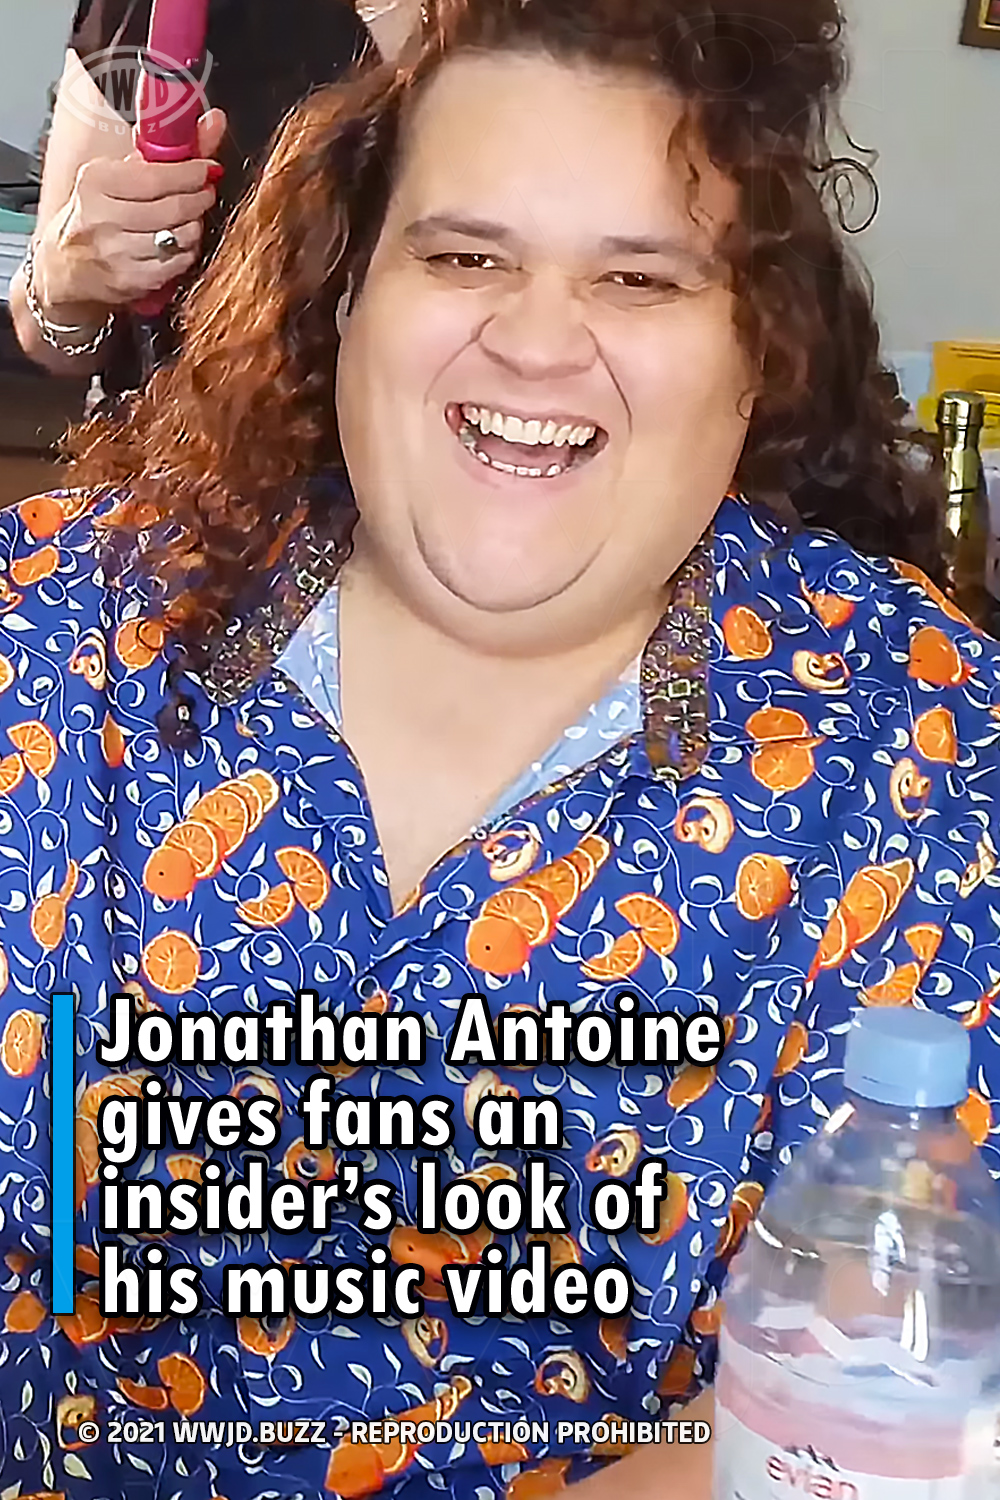 Jonathan Antoine gives fans an insider’s look of his music video